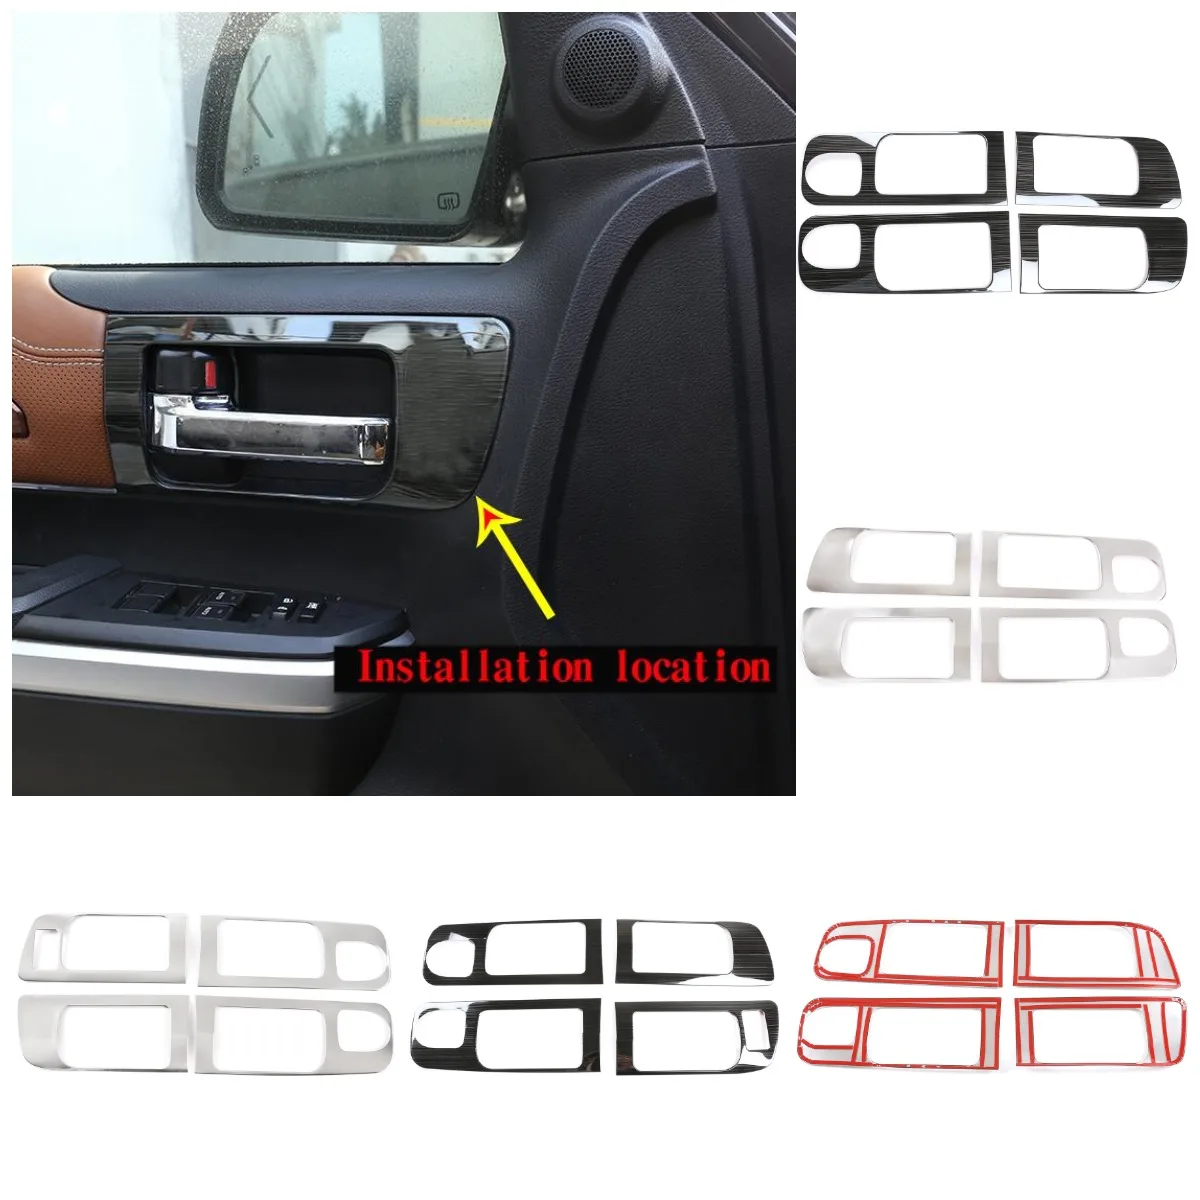 

Stainless Steel Car Interior Door Handle Frame Trim For Toyota Tundra 2014-2021 Black Titanium & Chrome Casing Decorate Styling